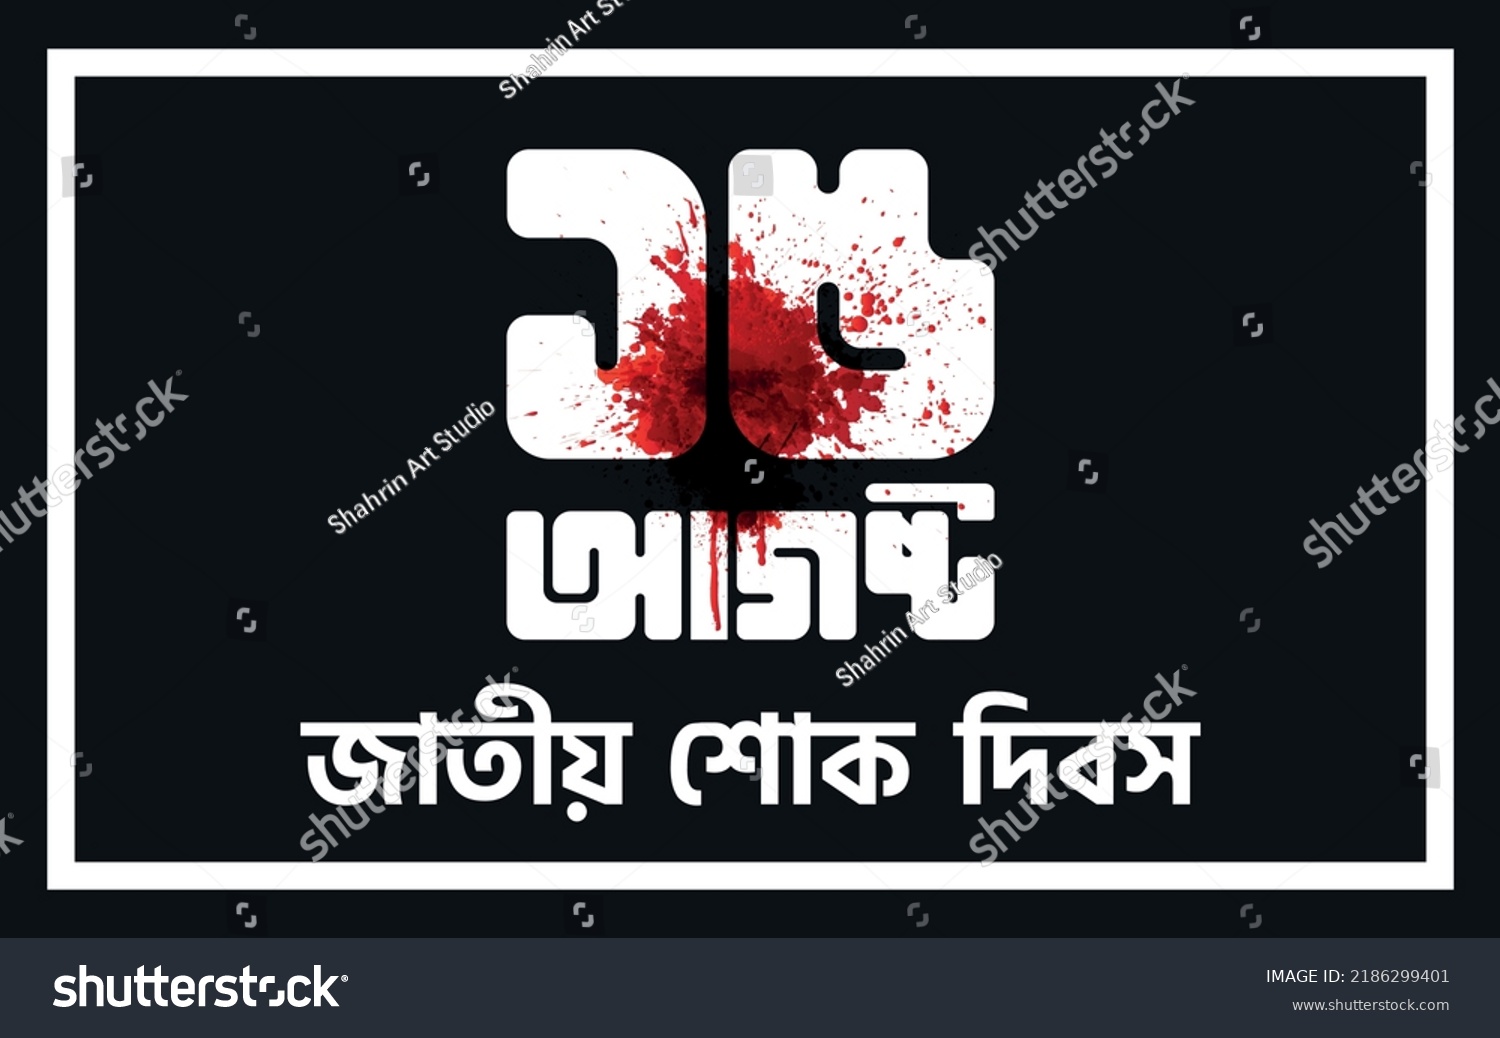 SVG of National Mourning Day 15 August in Bangladesh. The Mourning Bangla typography 15 August jatiyo sokh dibos means National Mourning Day. Vector poster illustration. svg